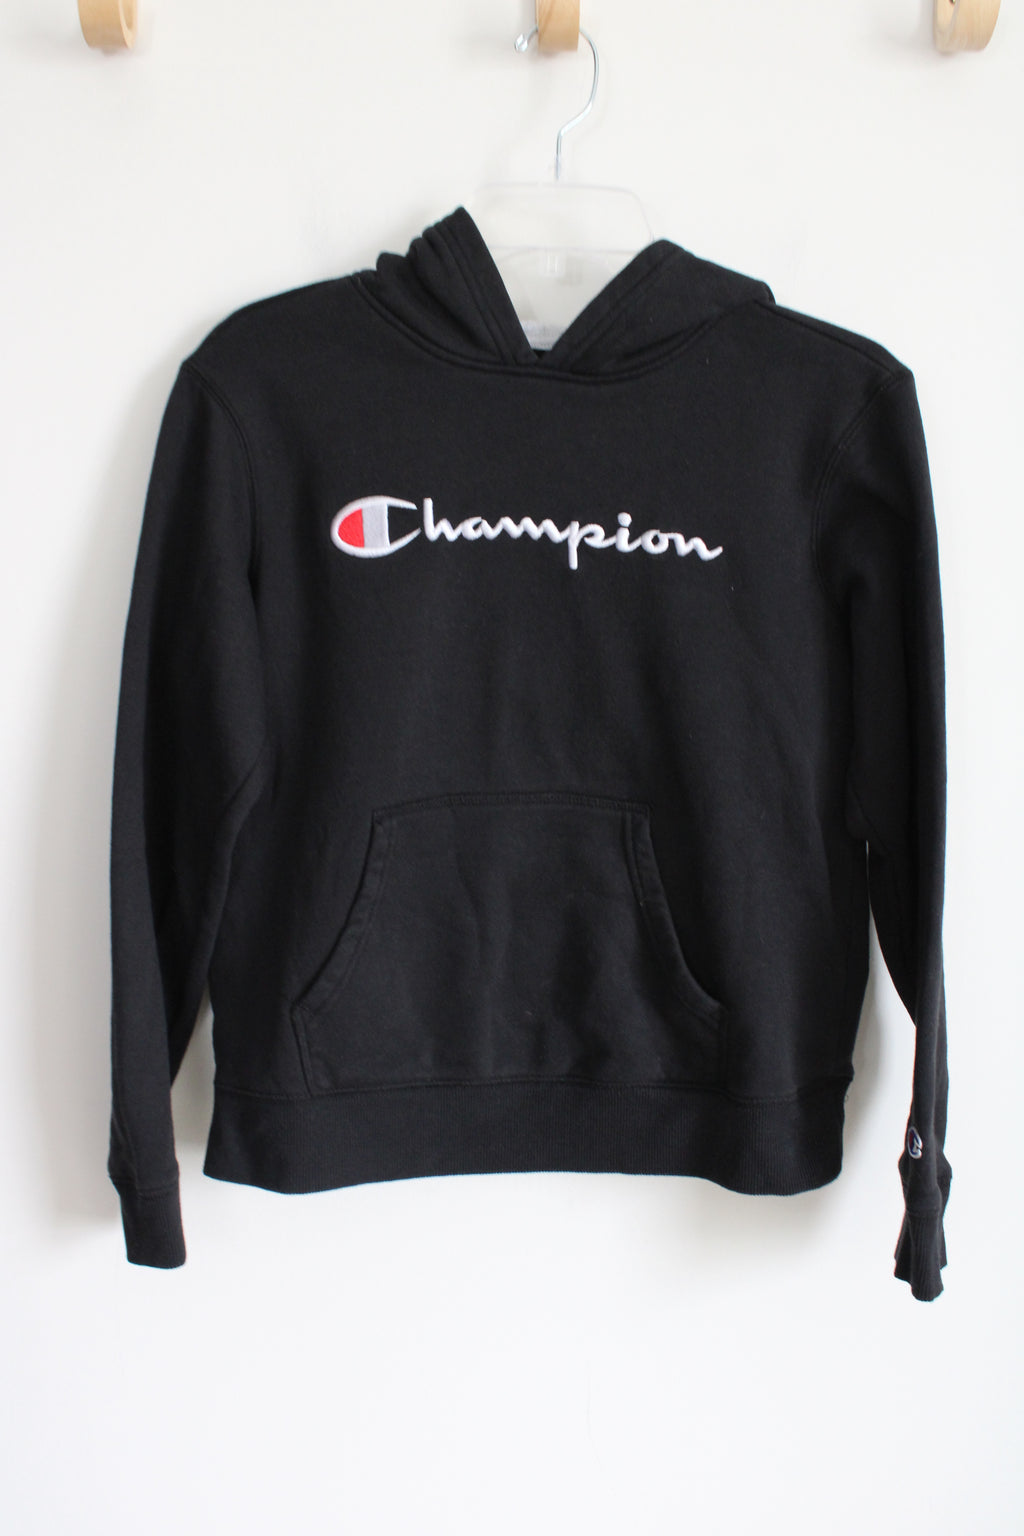 Champion Black Embroidered Logo Hoodie | Youth XL (18/20)